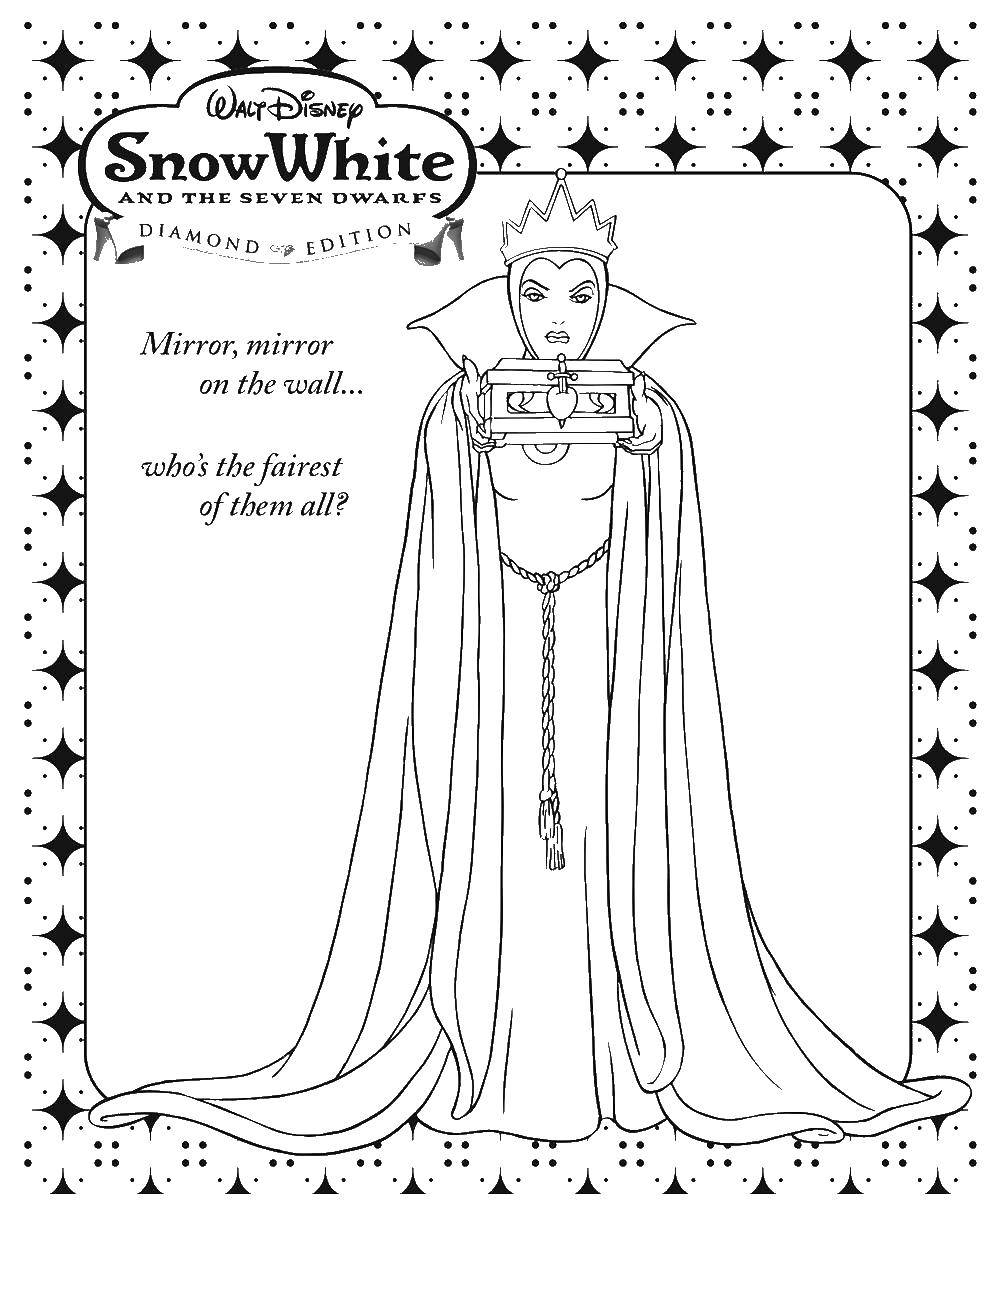 Coloring The snow Queen. Category The Queen. Tags:  Queen, crown, snow Queen.